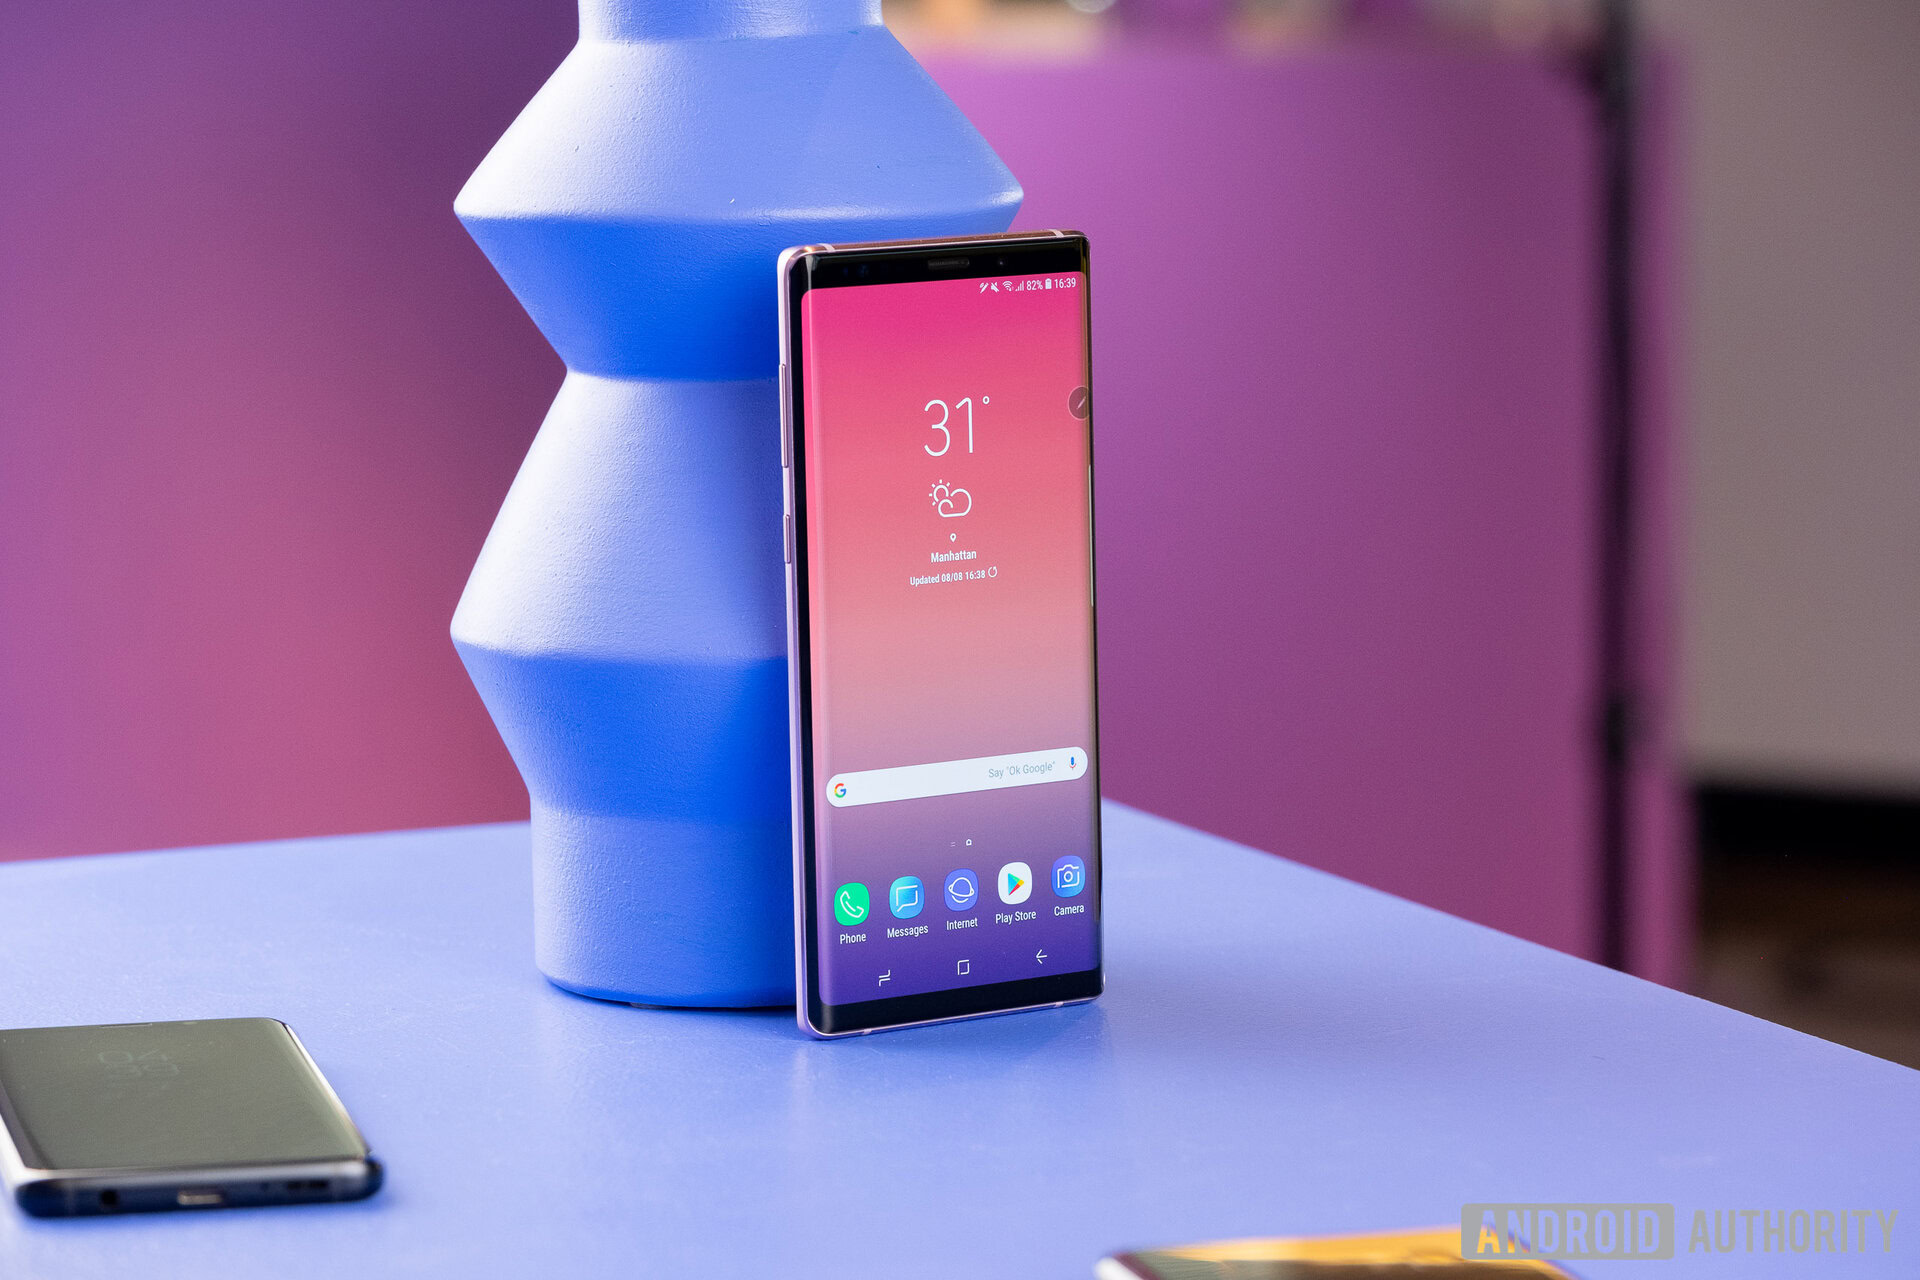 Samsung's Sam 3D Virtual Assistant is Now Taking Over the Internet, Will  She Replace Bixby?